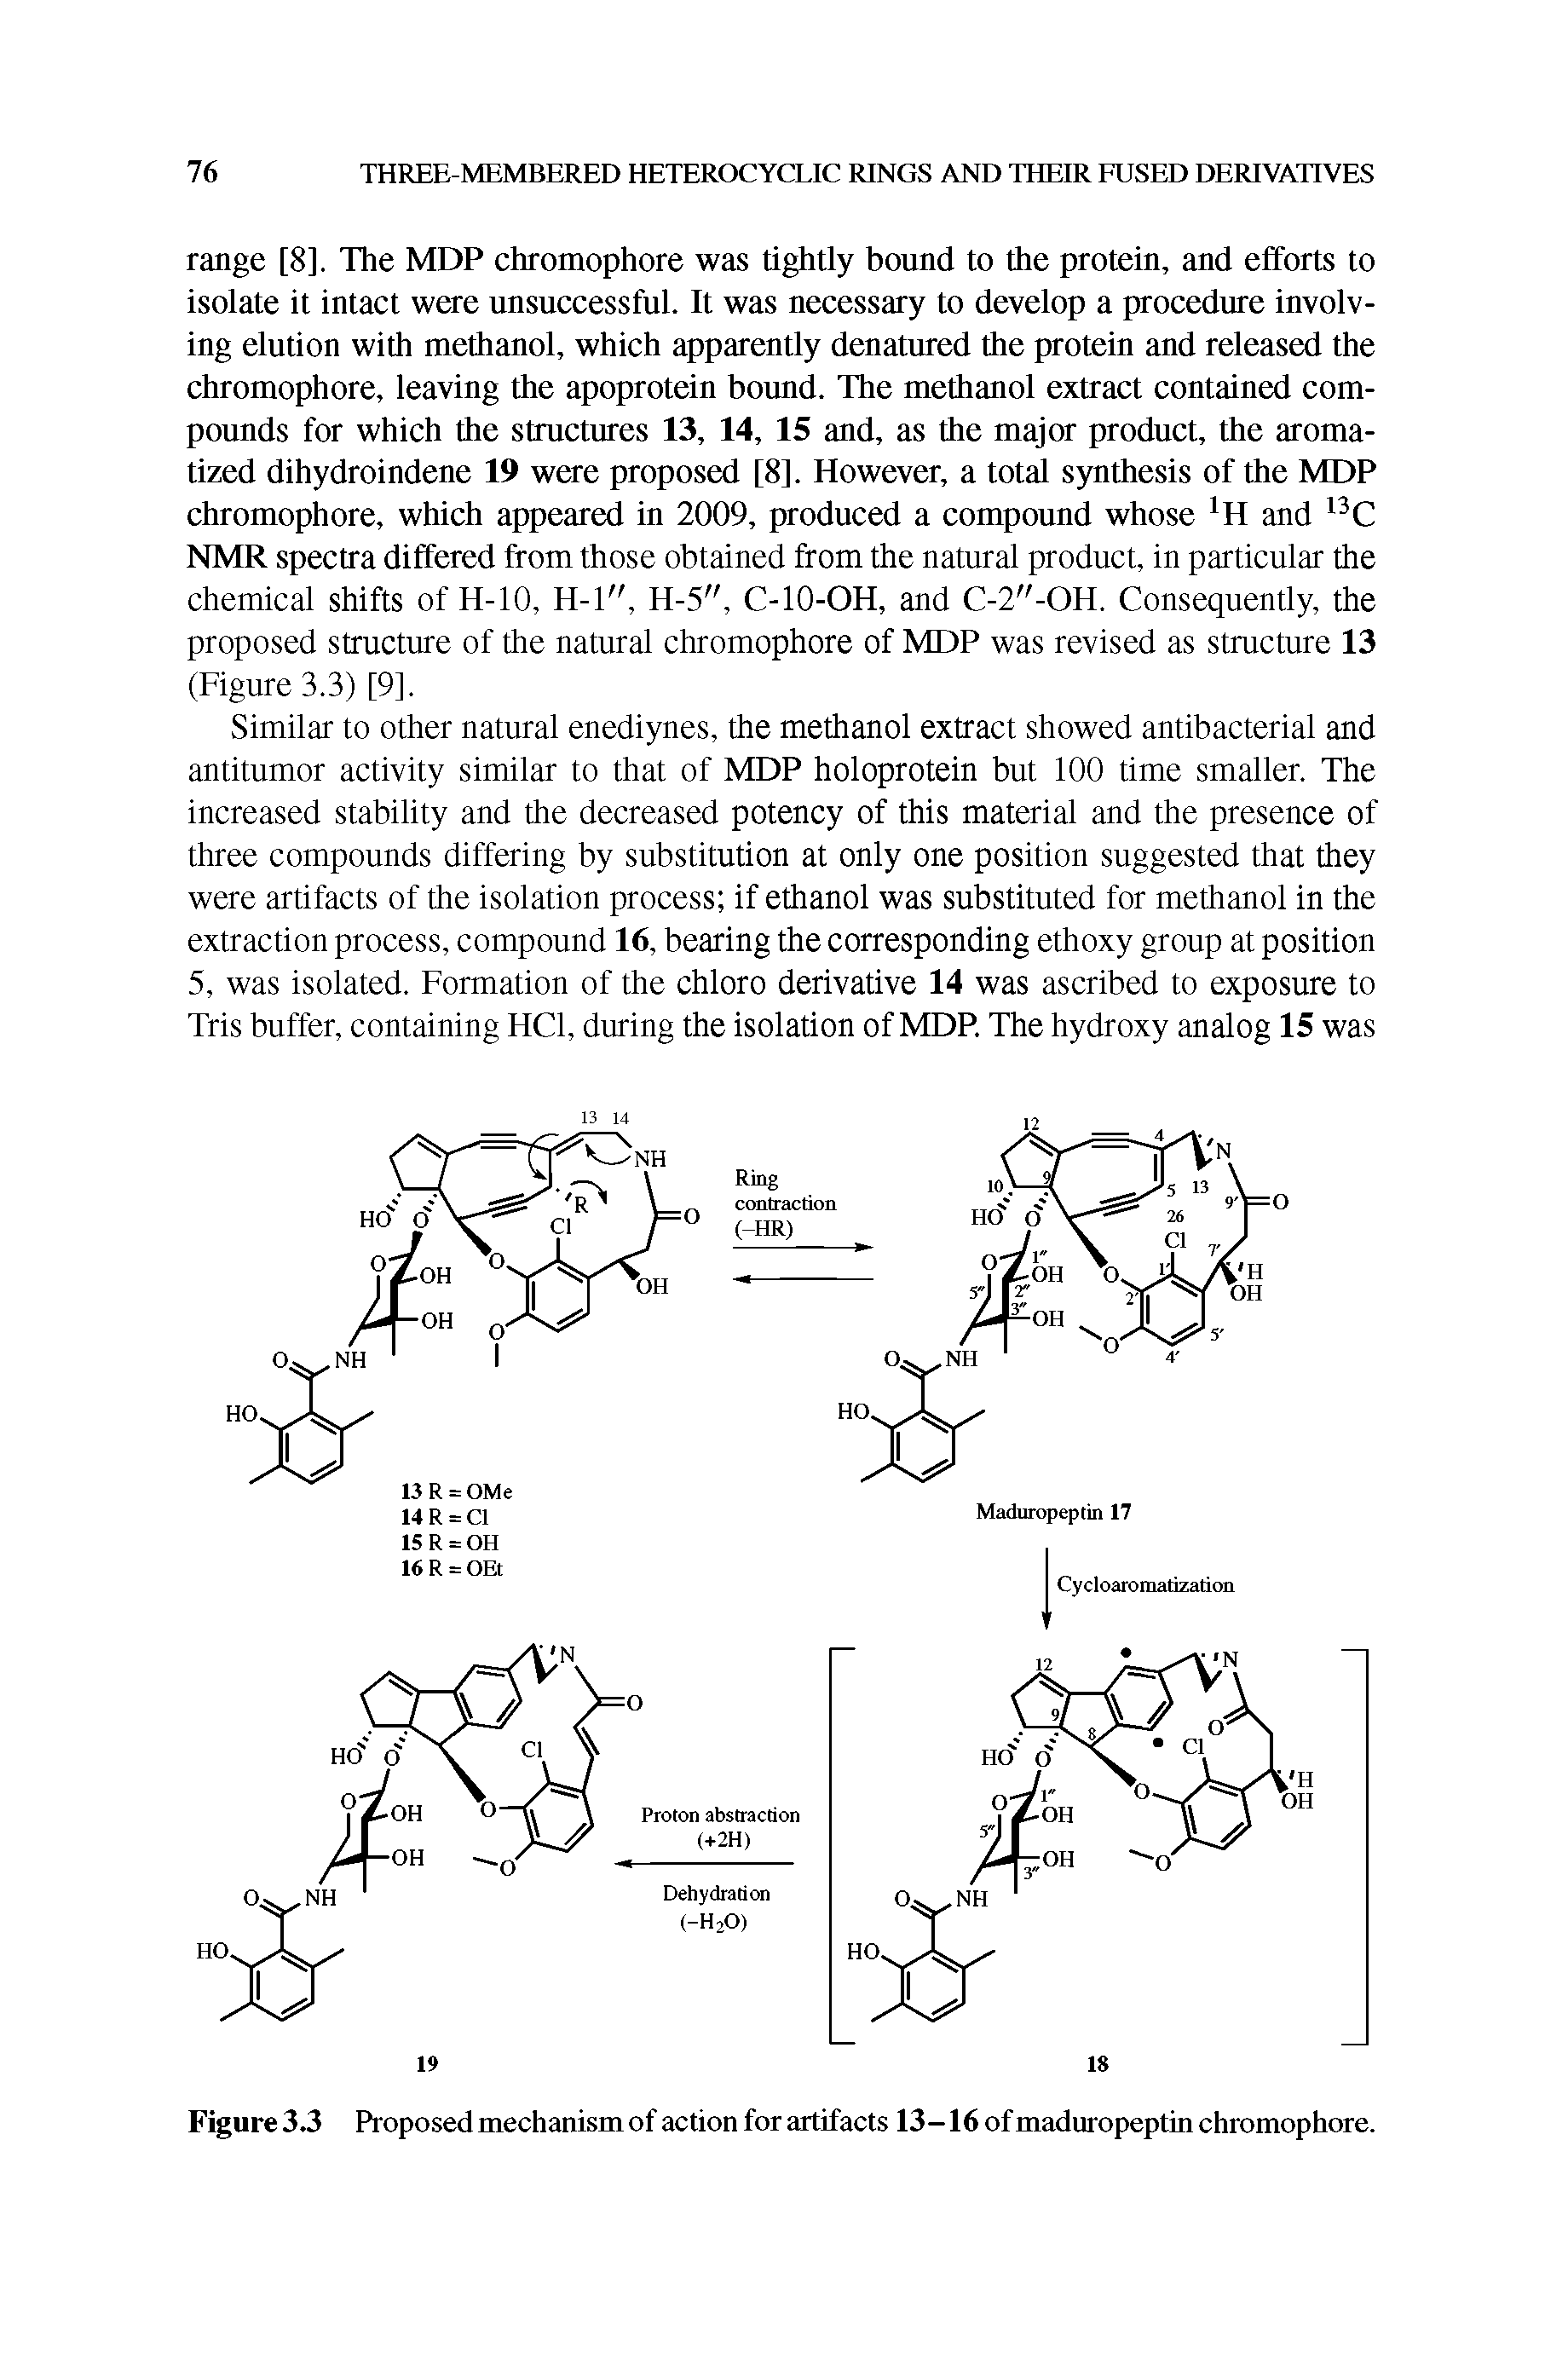 Figure 3.3 Proposed mechanism of action for artifacts 13-16 of maduropeptin chromophore.